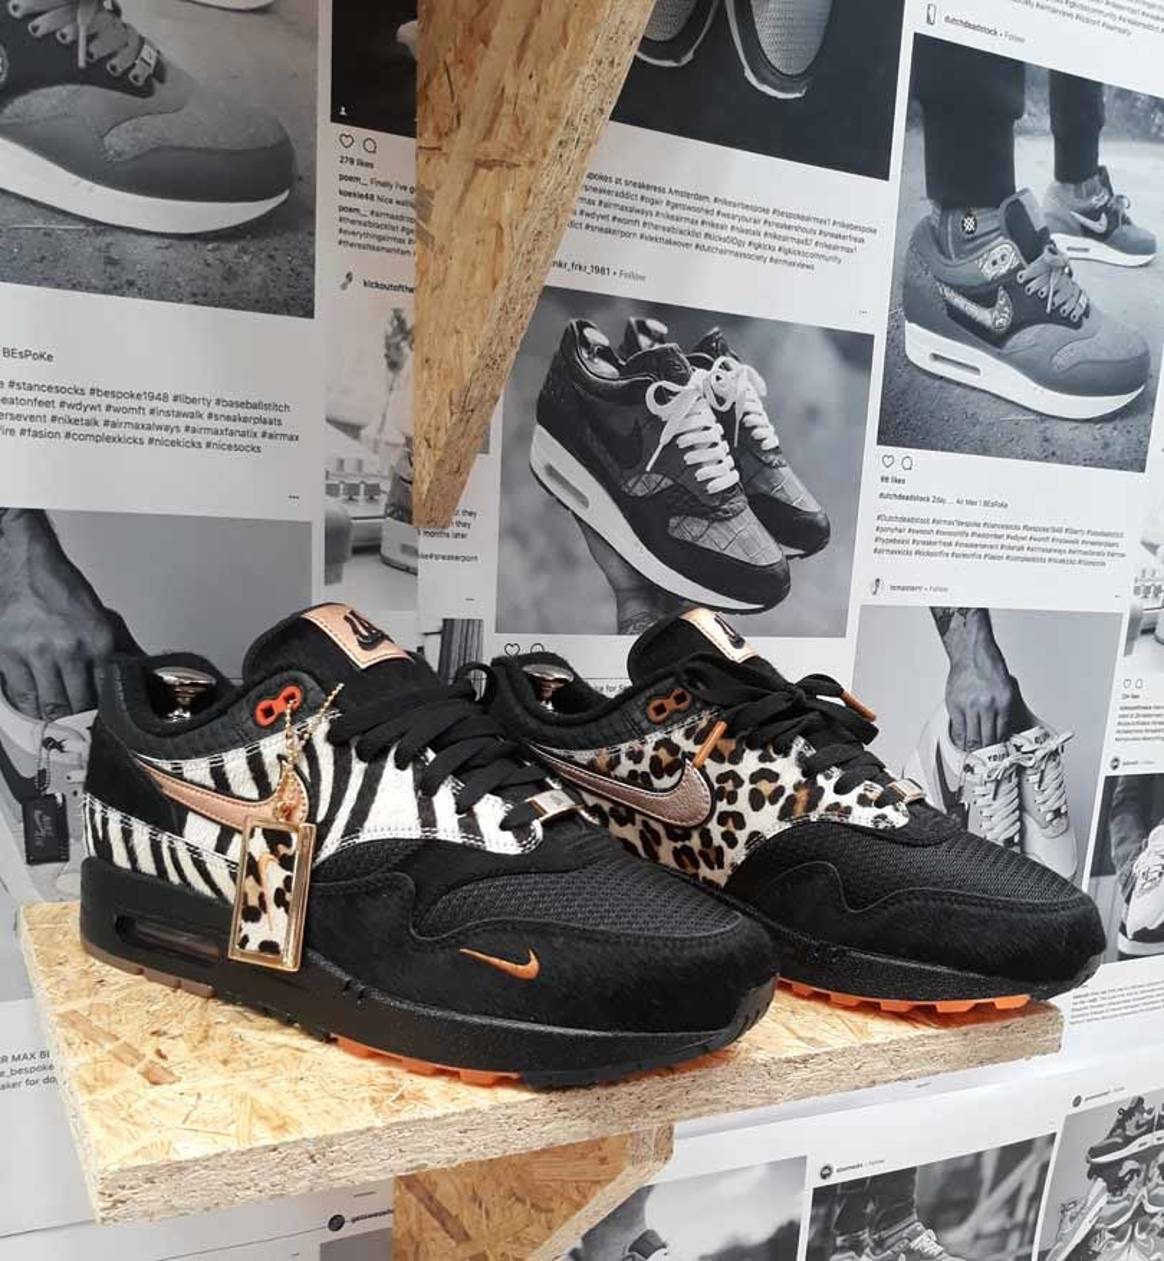 In pictures: Sneakerness Amsterdam celebrates customization in 2018